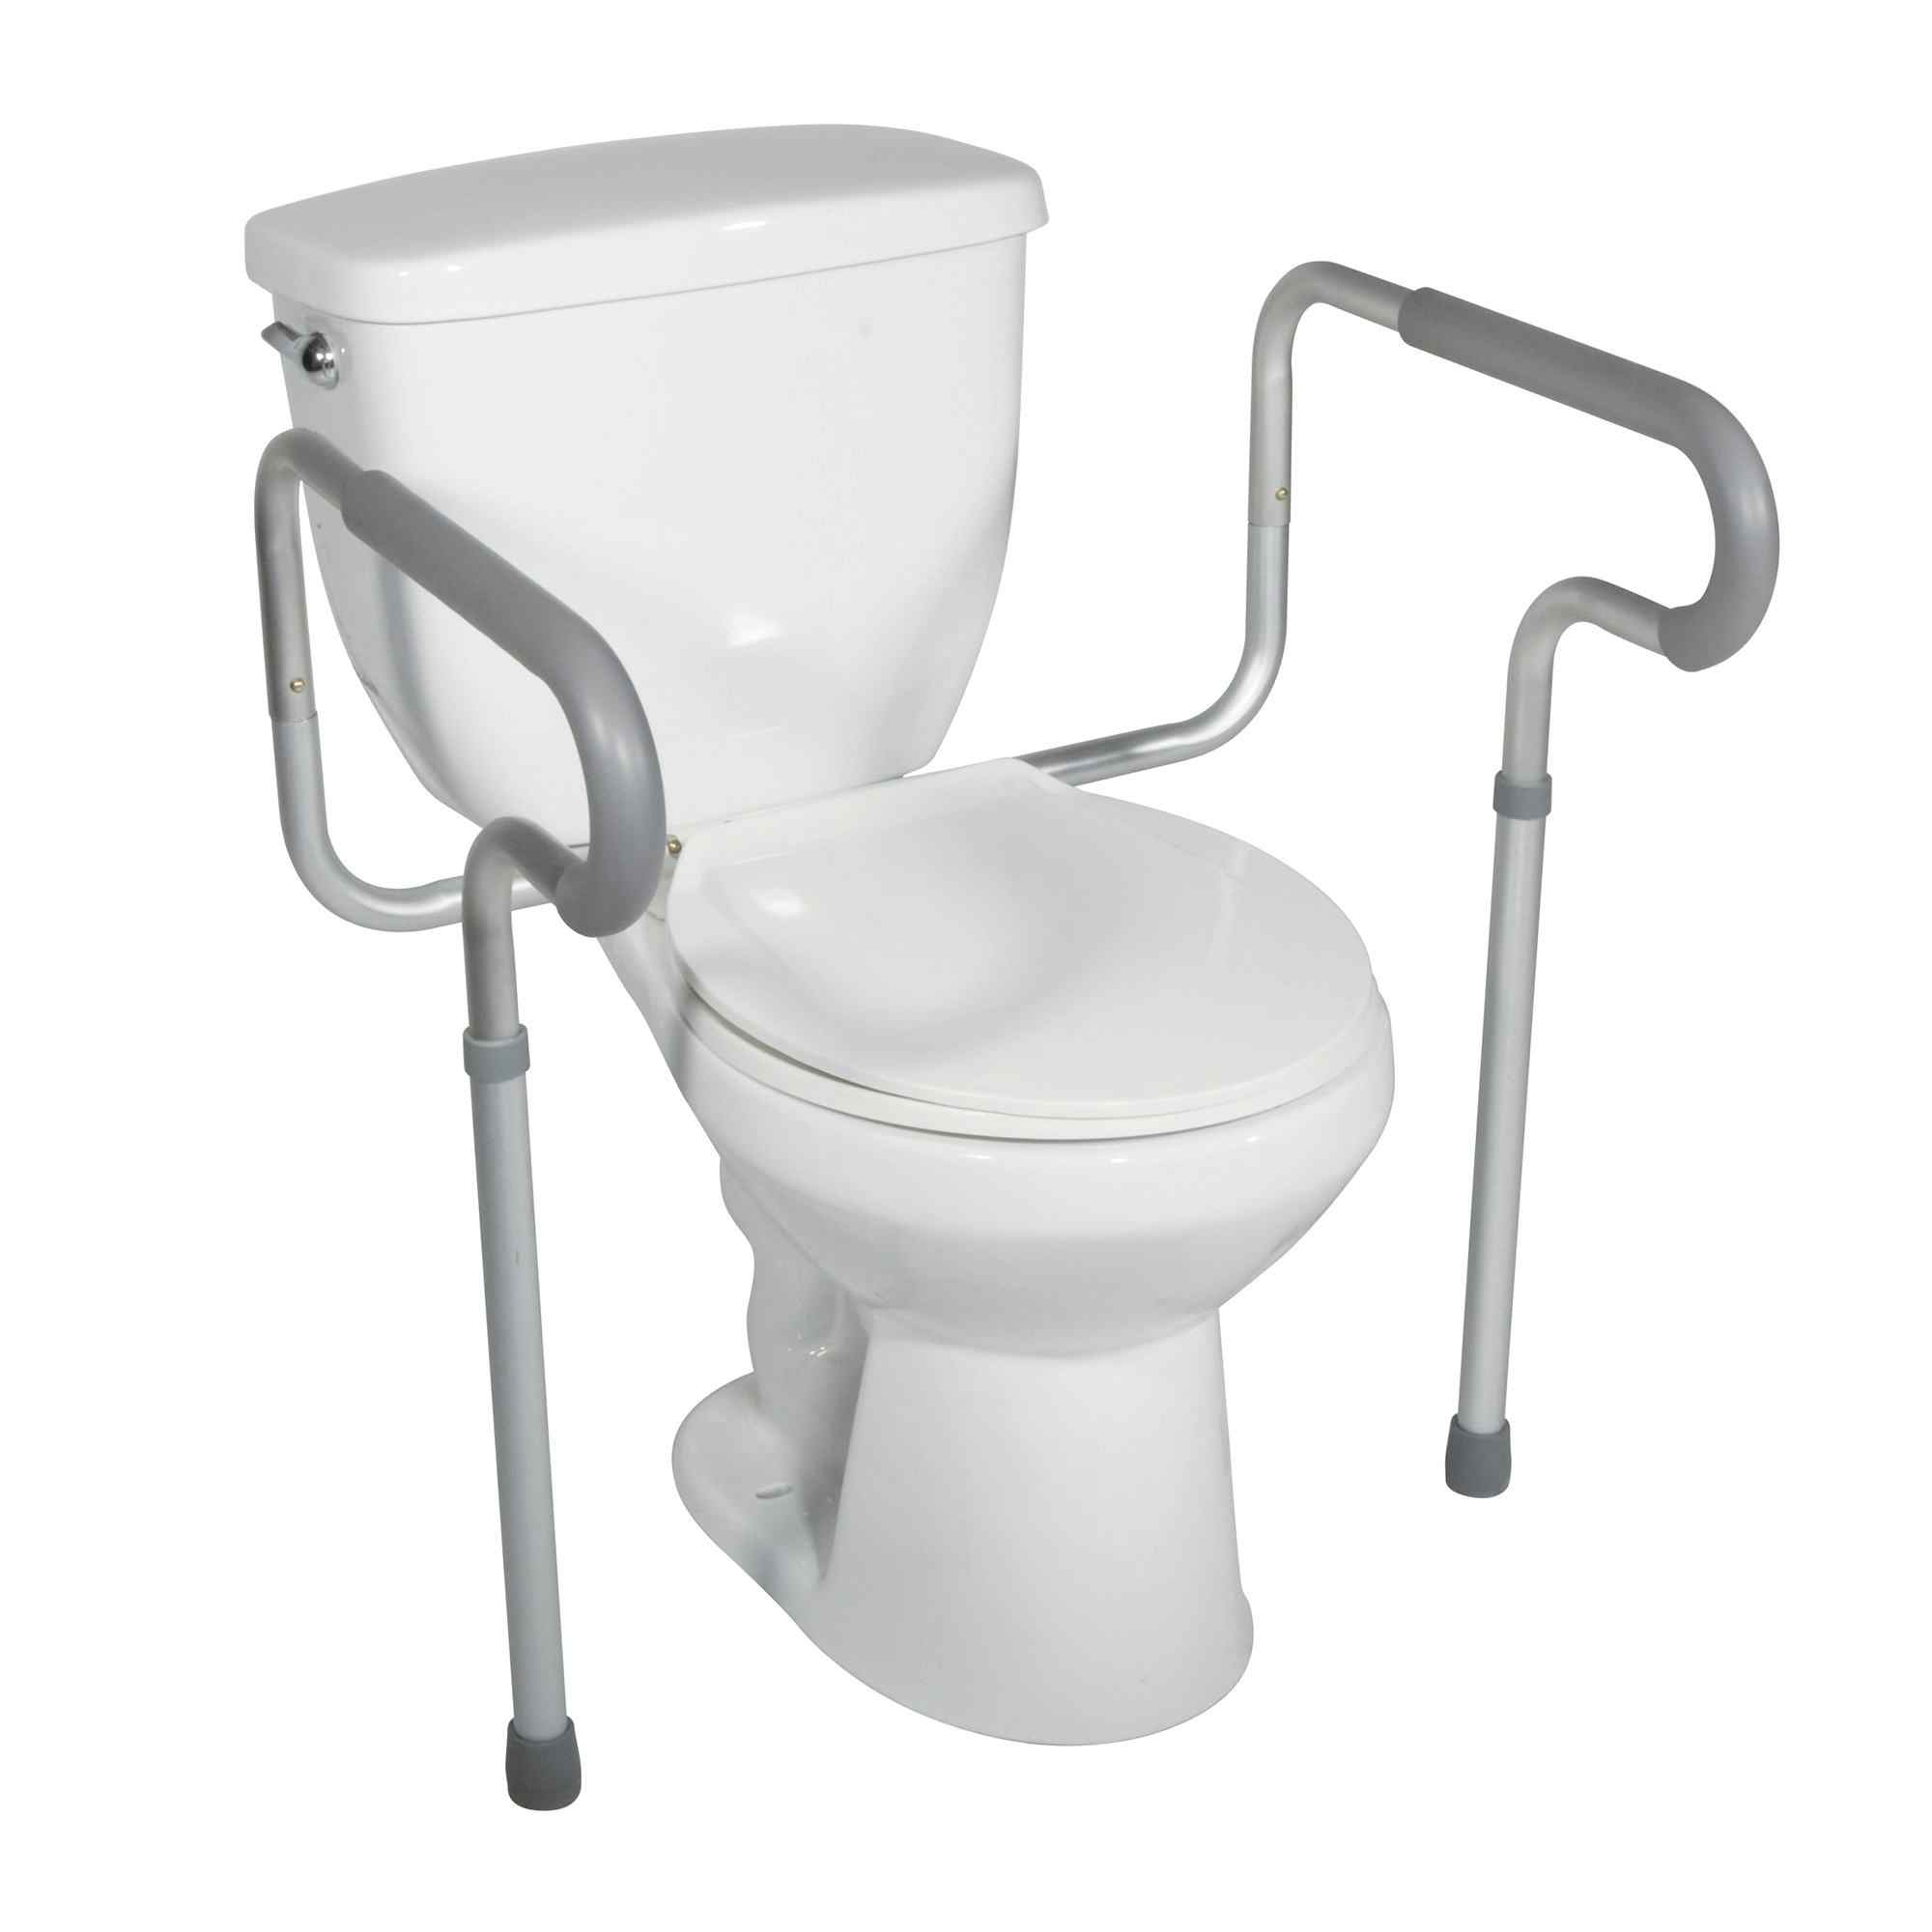 drive Toilet Safety Frame, 12001-4, 1 Each